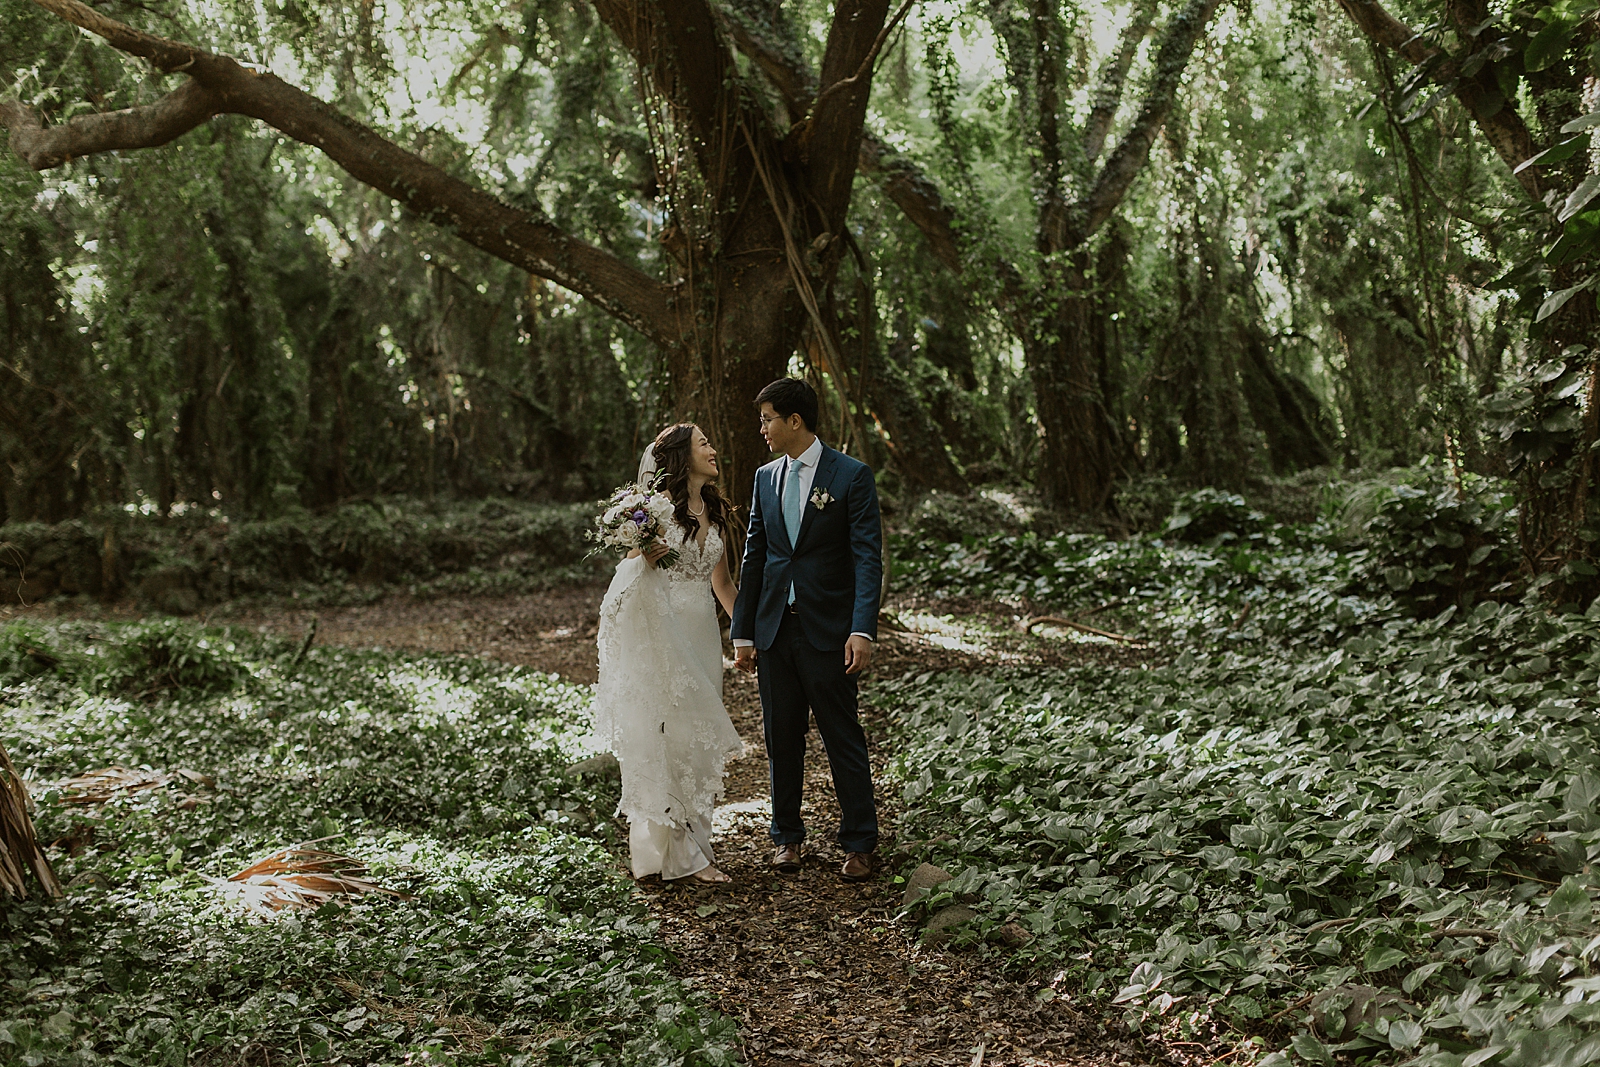 Bride and Groom looking at each other in front of a tree in the forest